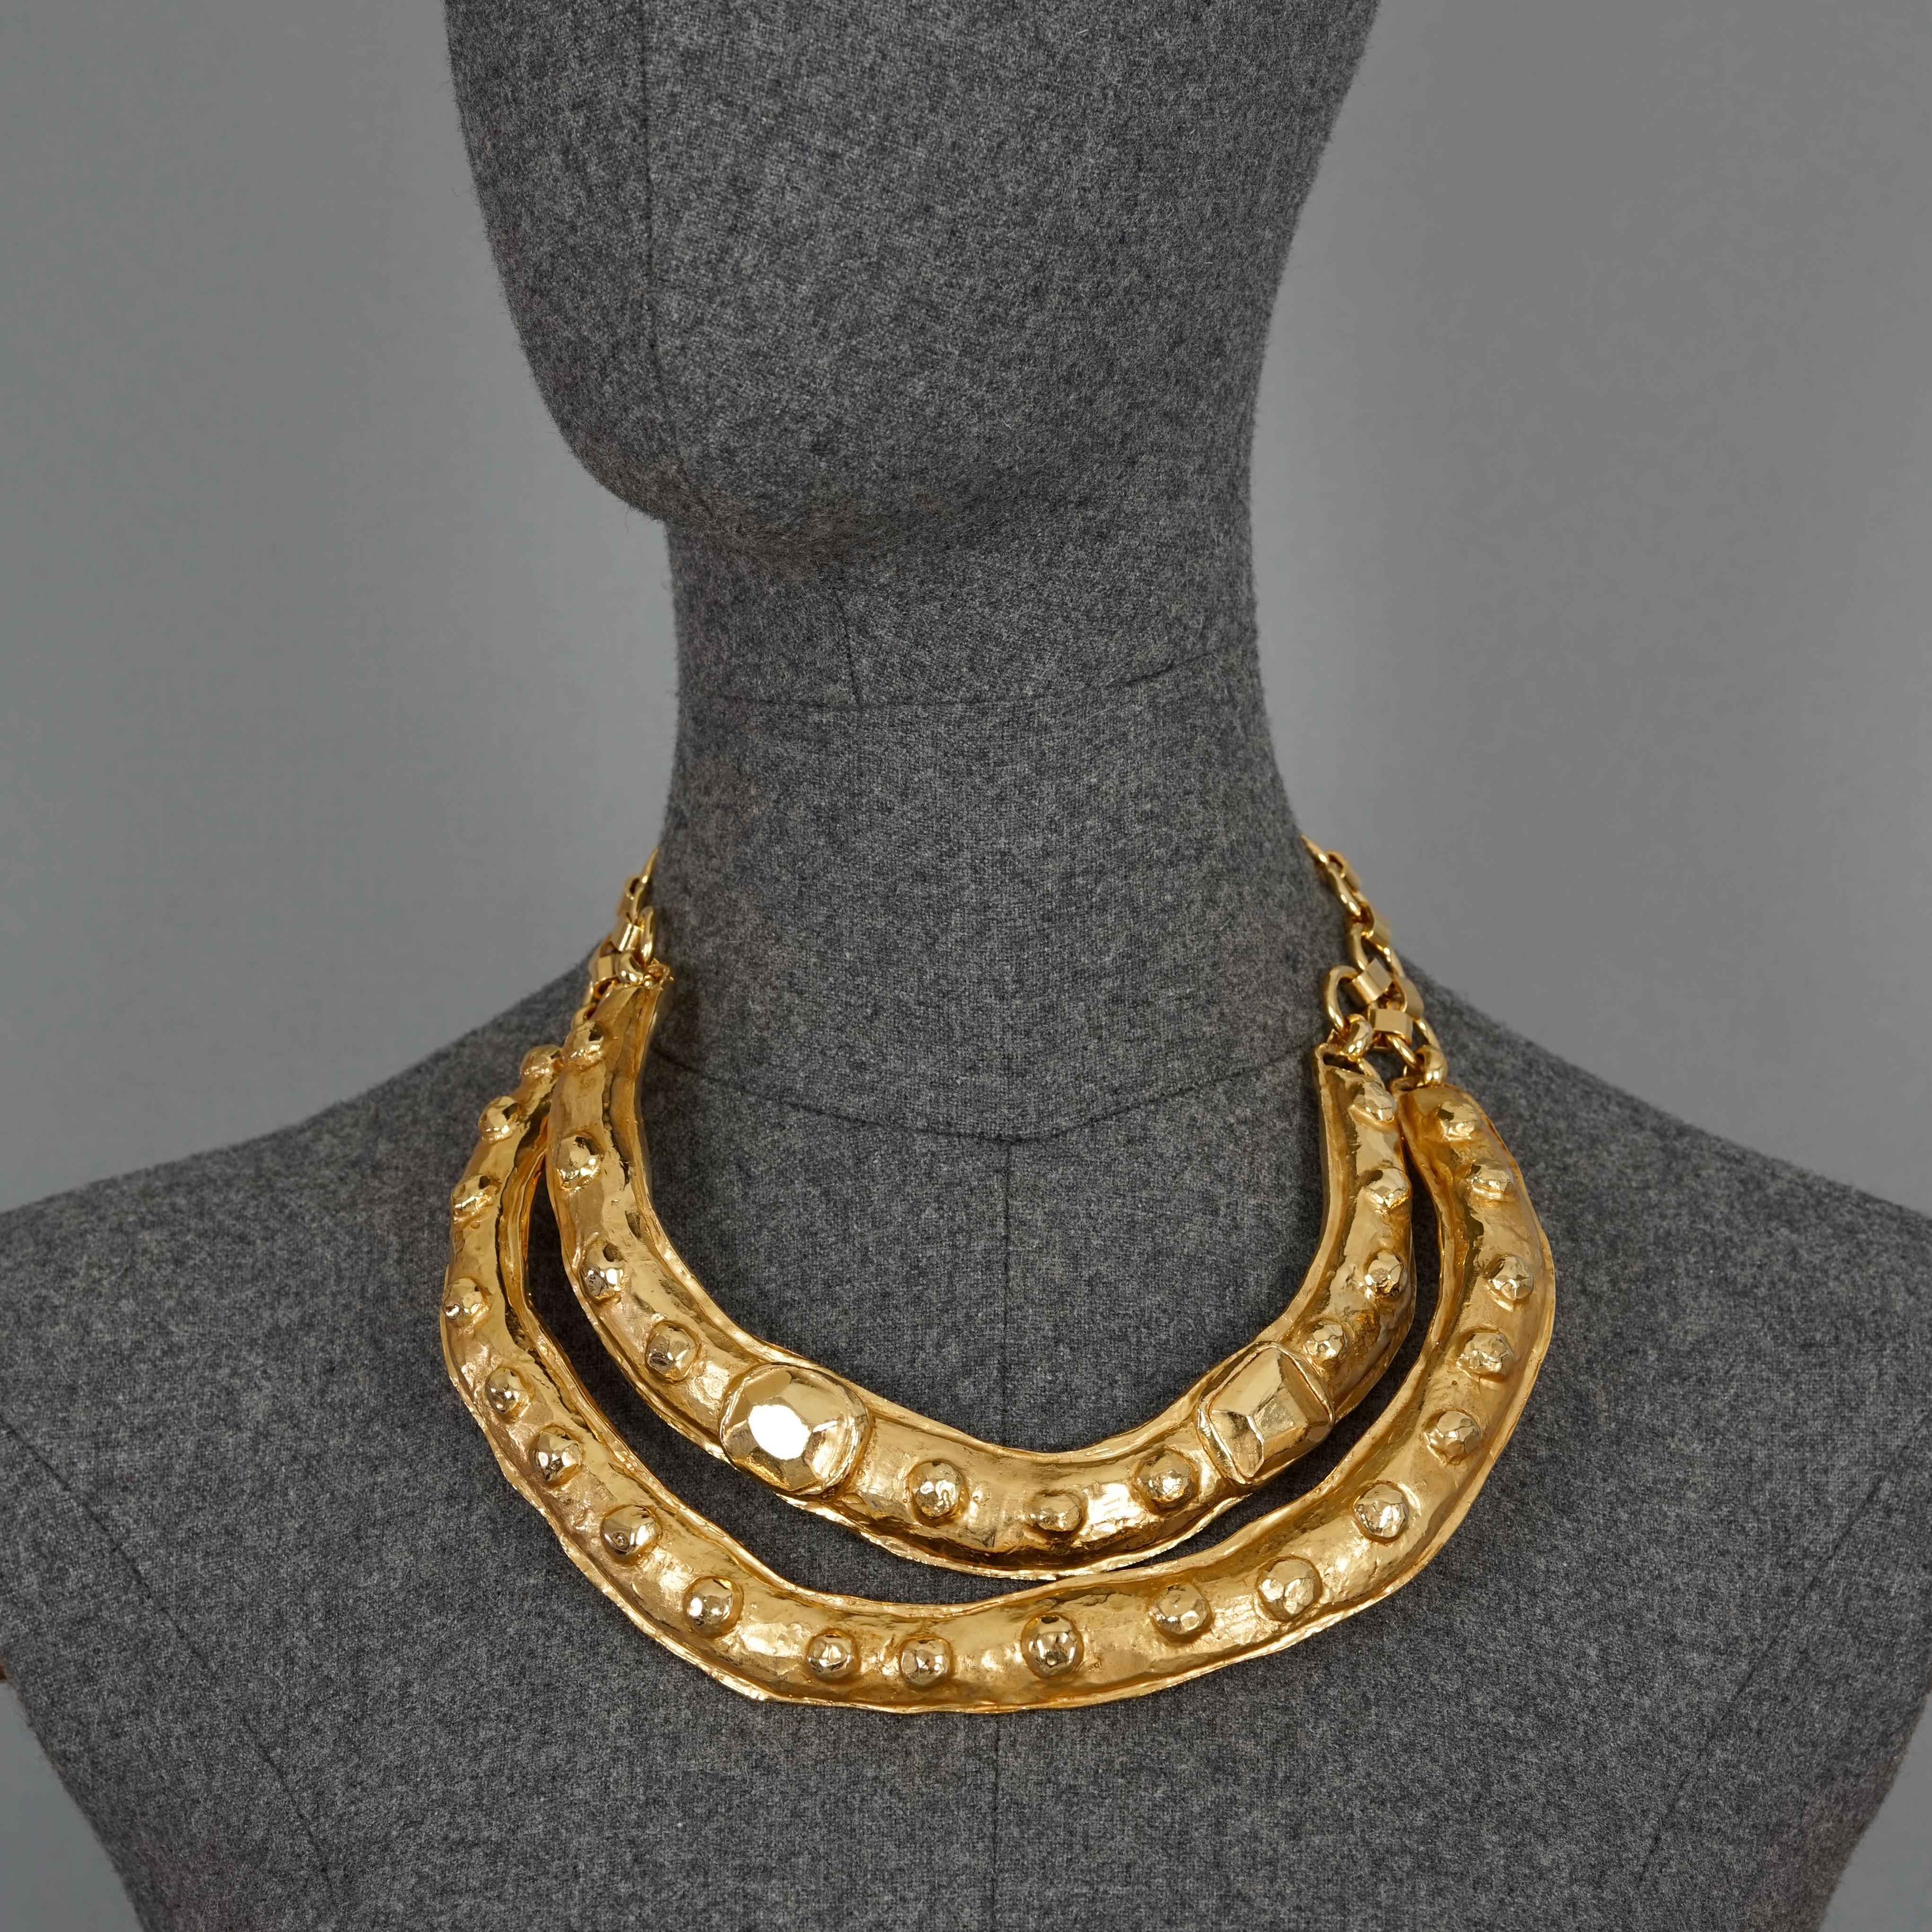 Vintage Runway CHRISTIAN LACROIX Double Layer Masai Rigid Necklace In Excellent Condition For Sale In Kingersheim, Alsace